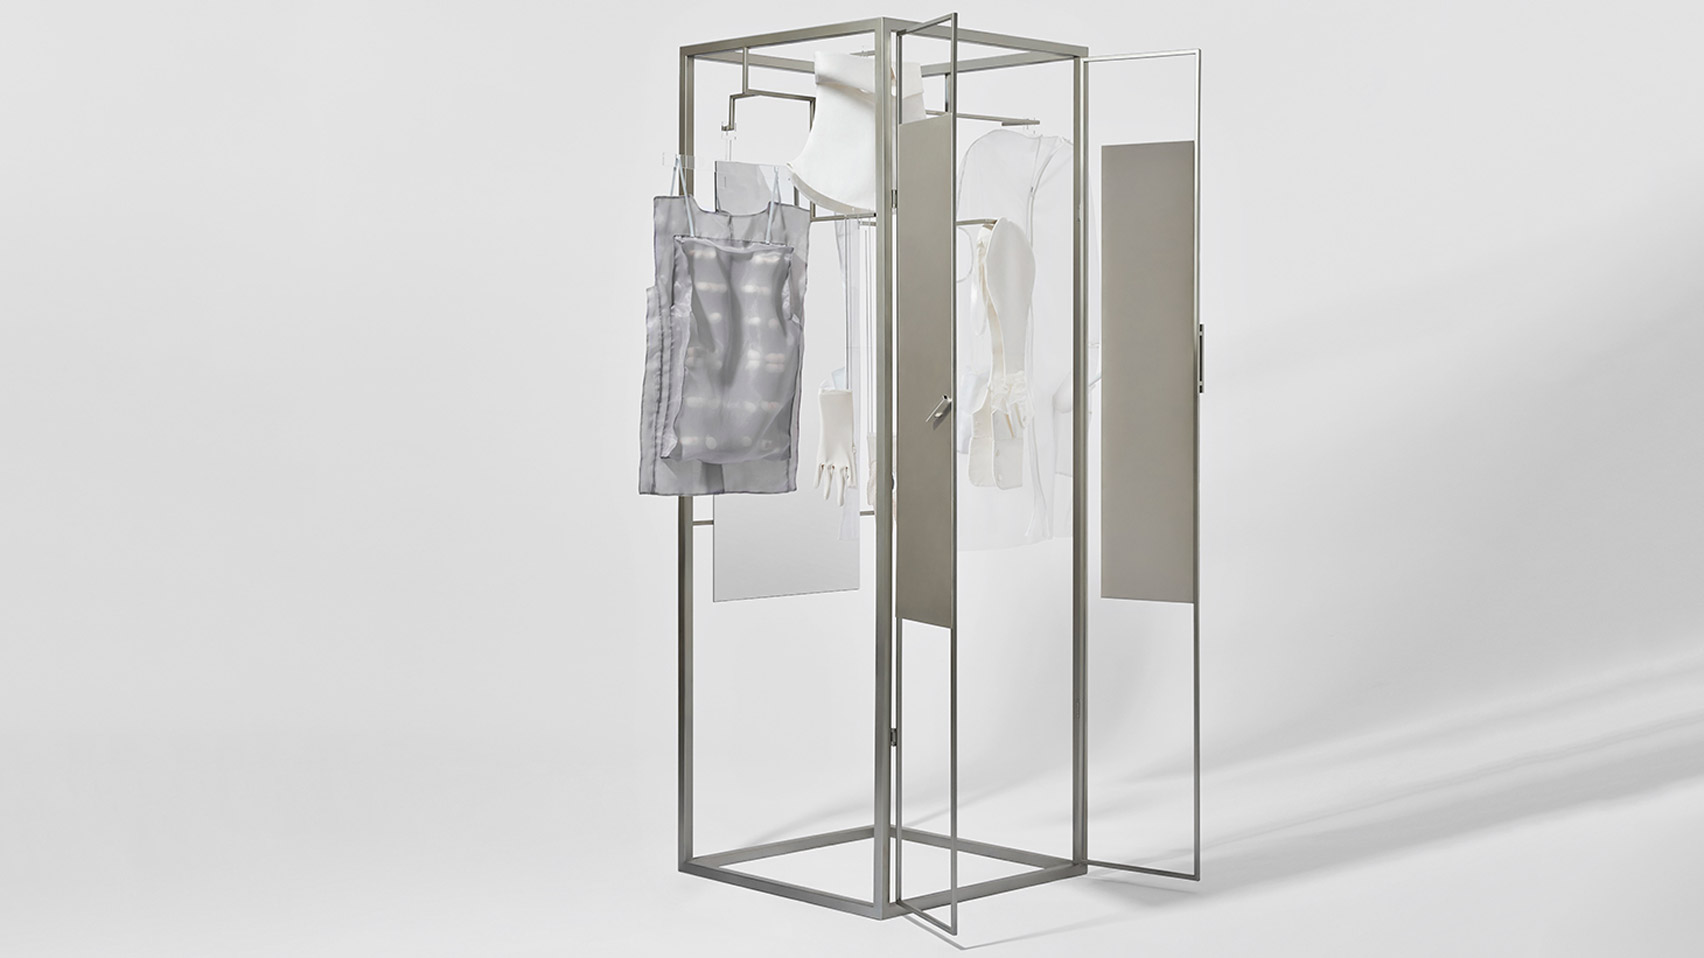 Baohan Jiang's deconstructed wardrobe aims to change our perception of time